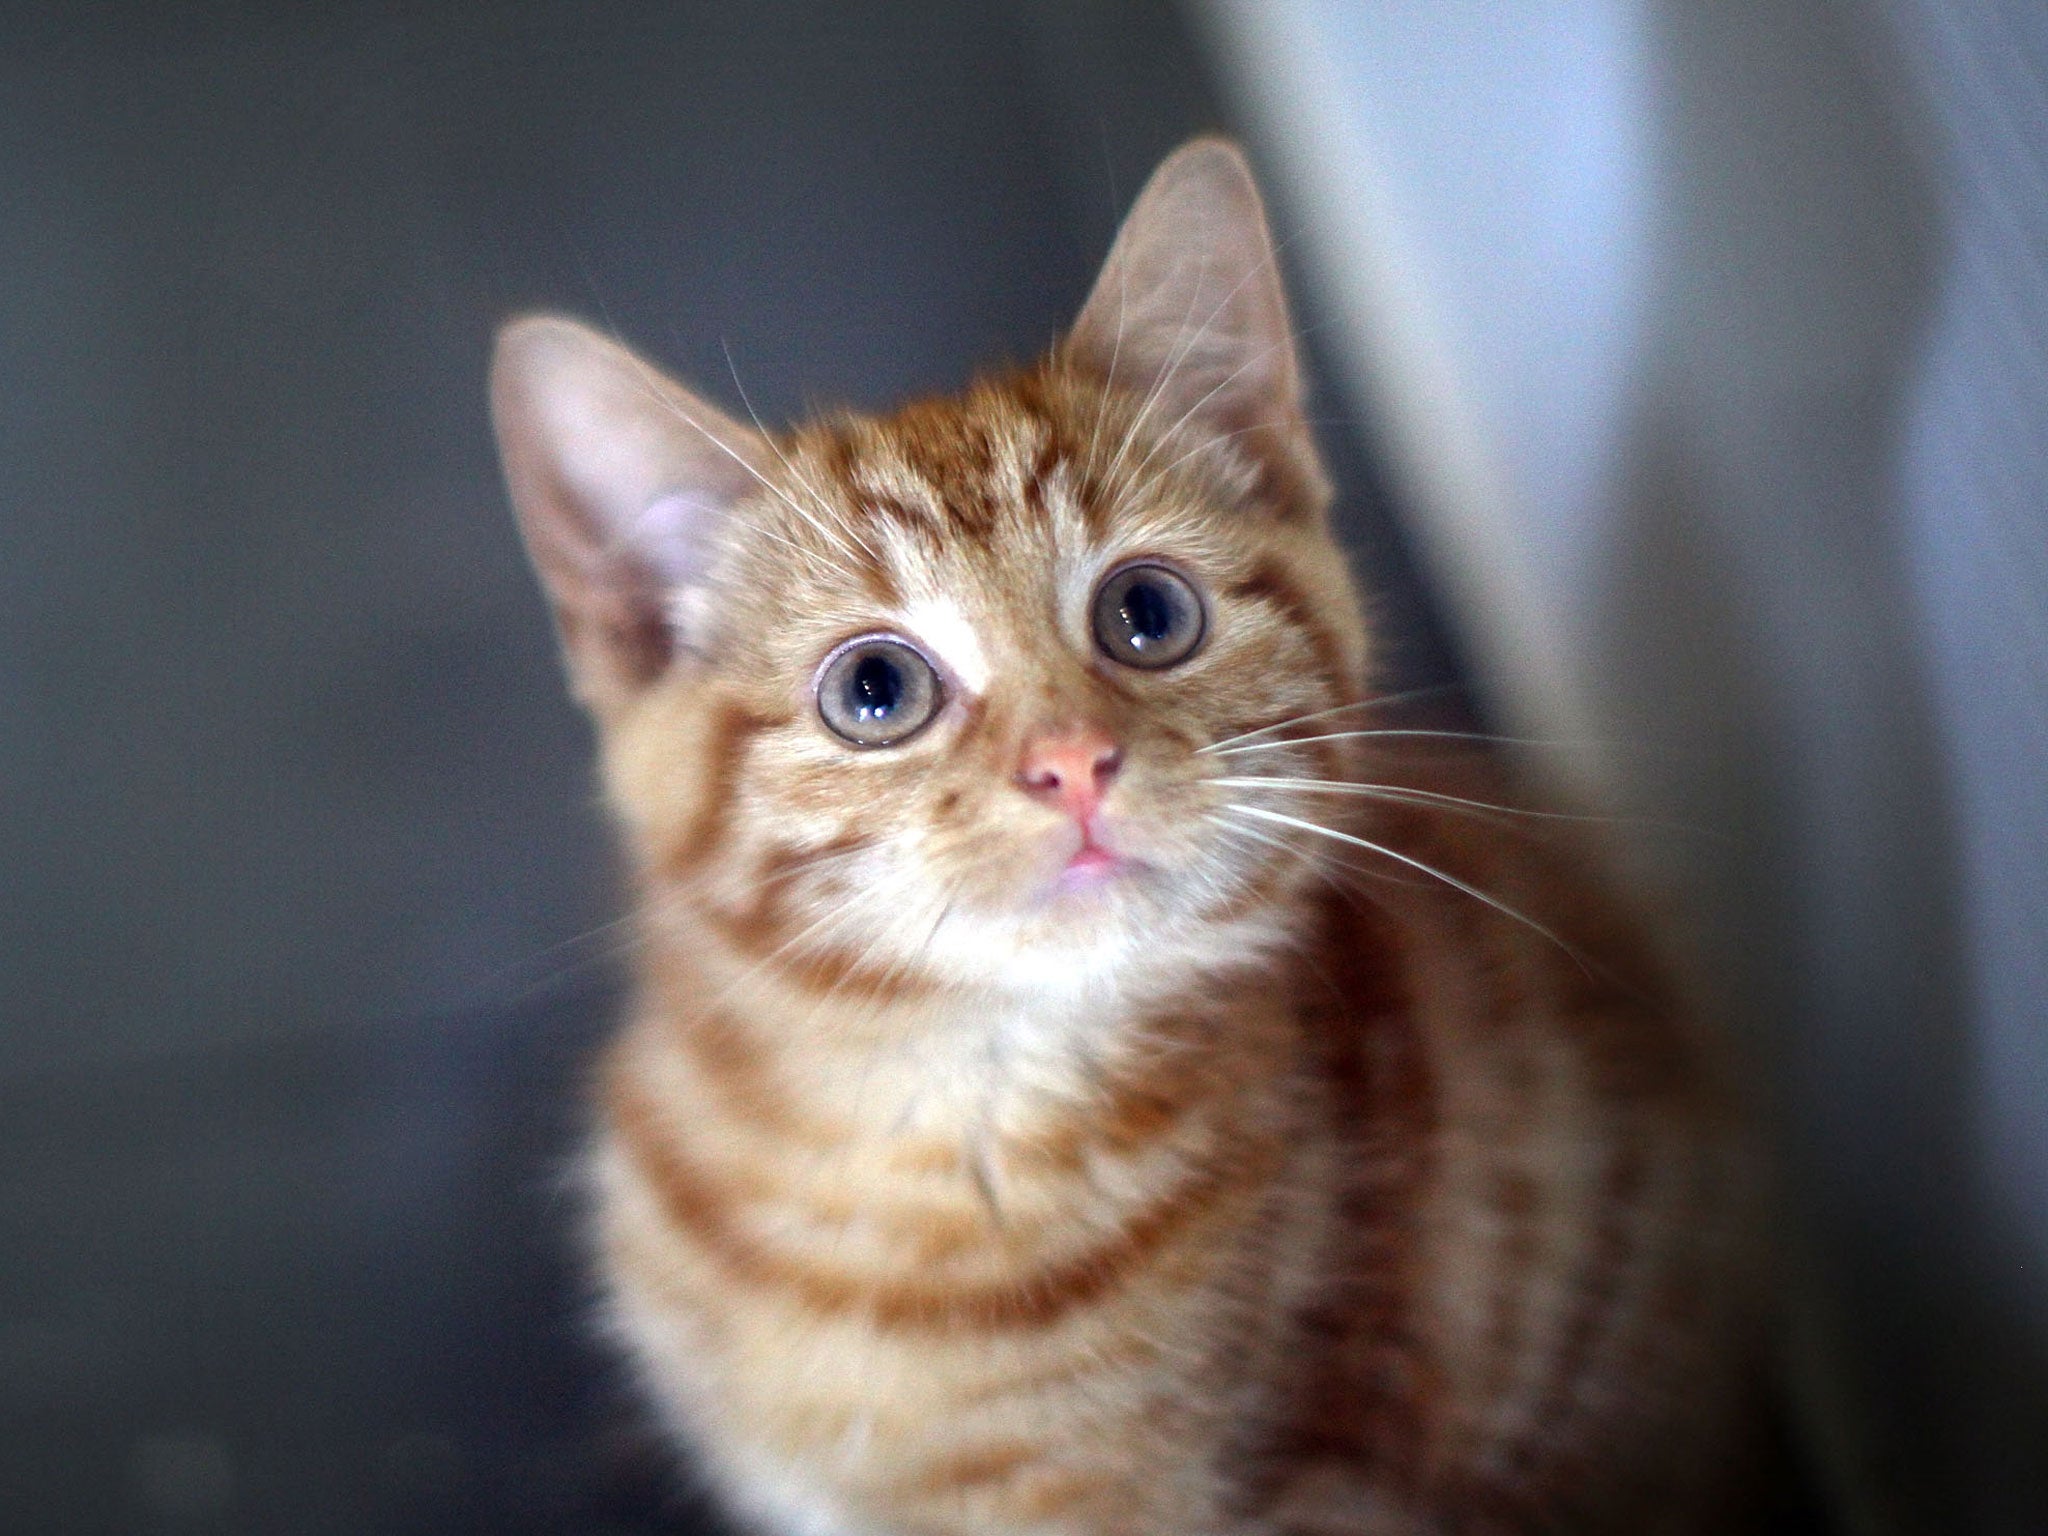 Can Kittens Eat Adult Cat Food? Expert Guide Reveals All